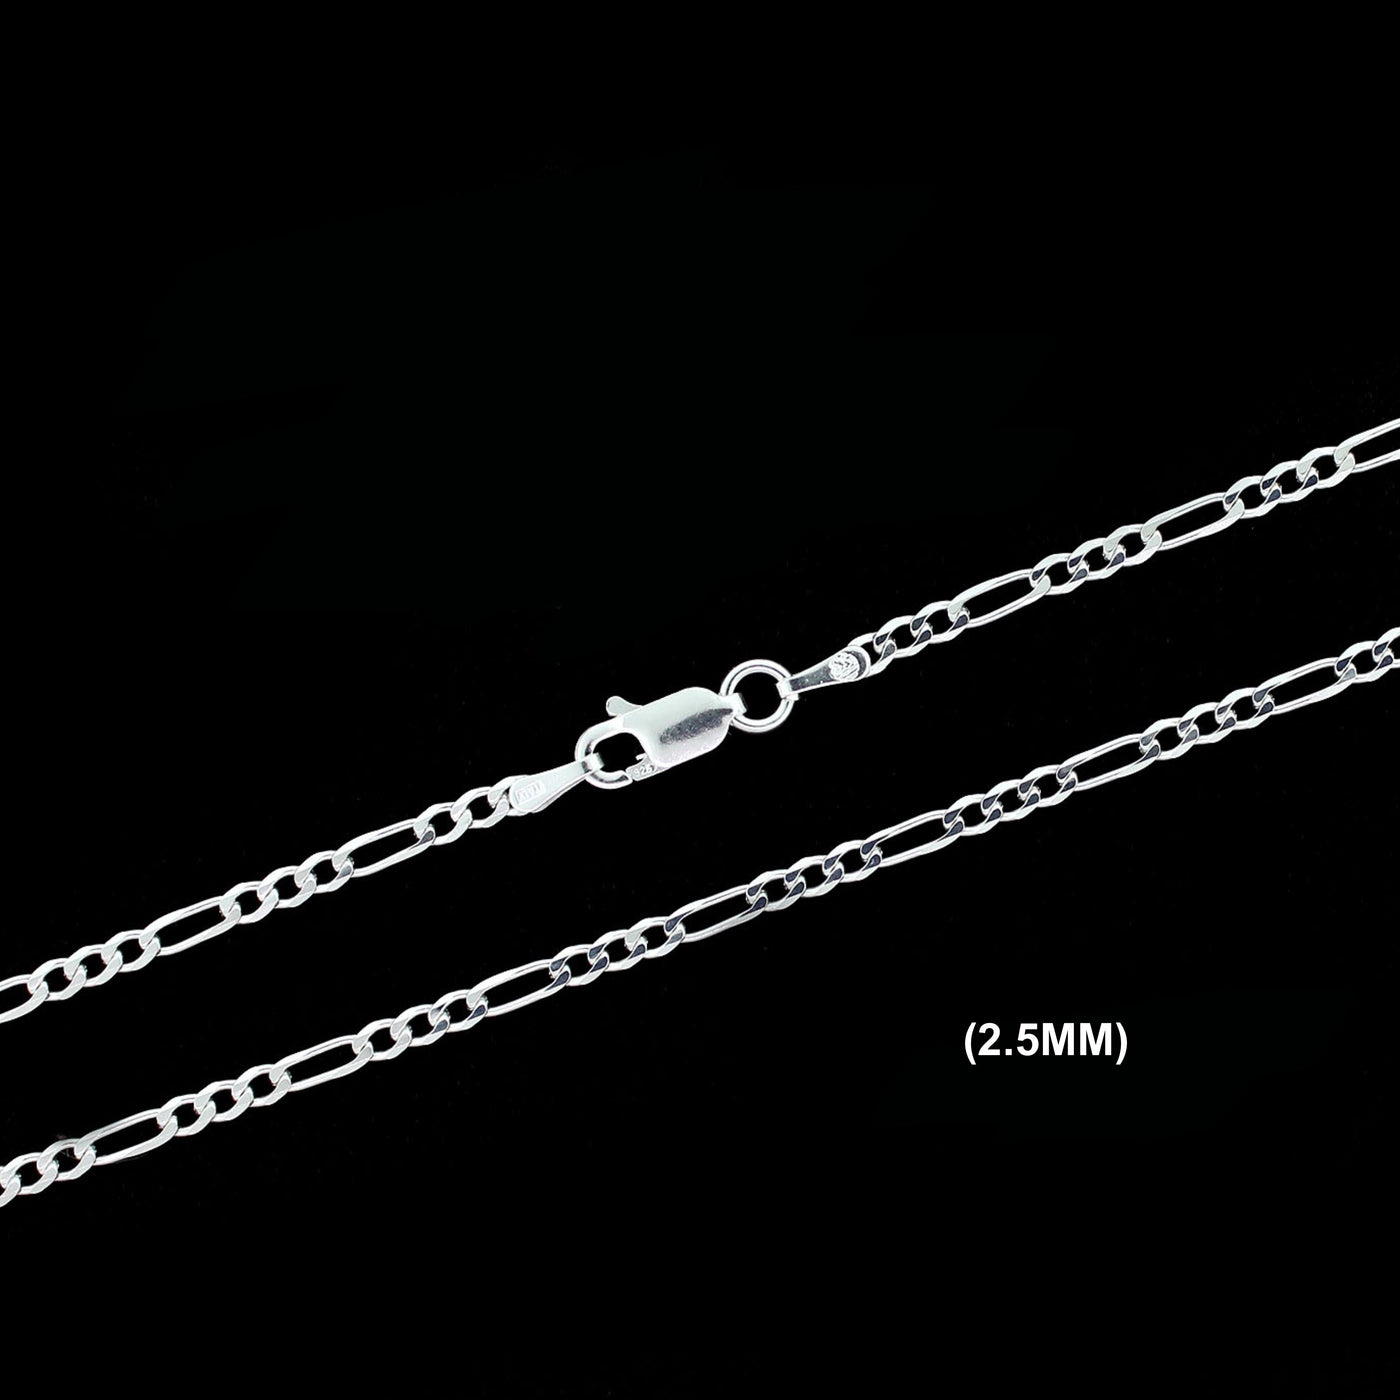 2.5MM Solid 925 Sterling Silver Figaro Link Chain Necklace or Bracelet ITALY